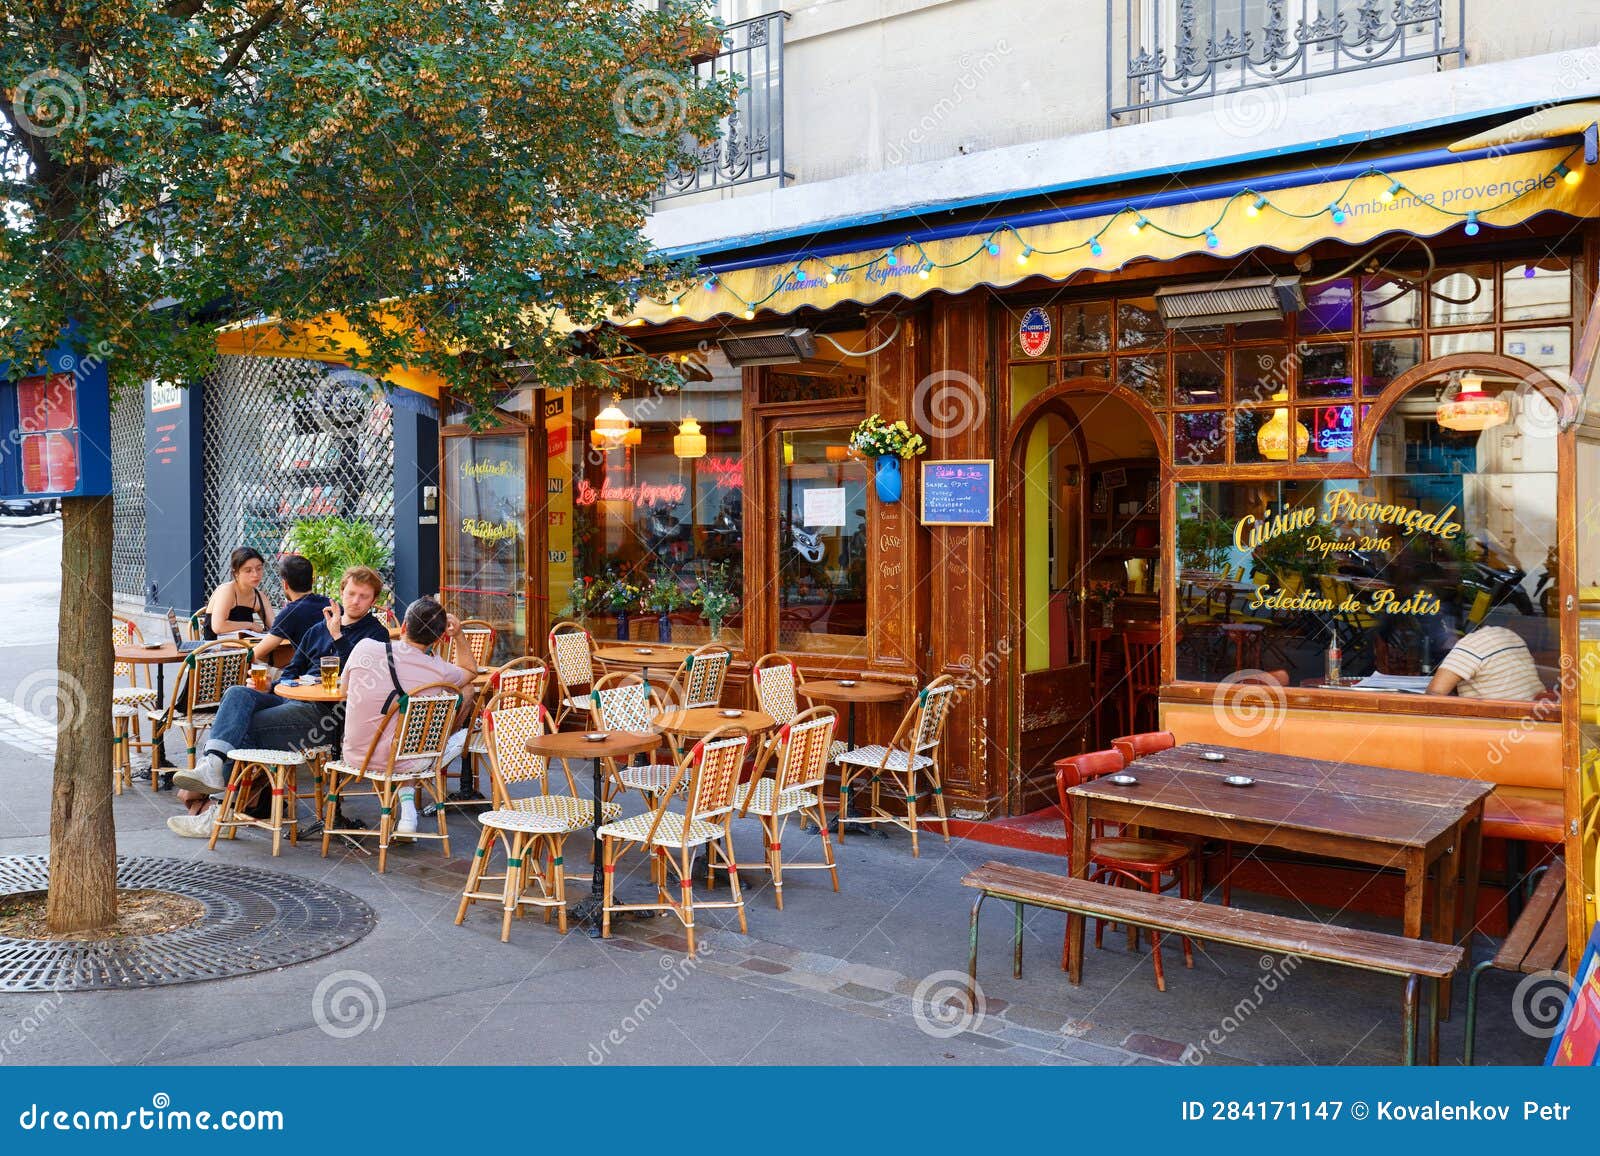 The French Traditional Restaurant Mademoiselle Raymonde Located in ...